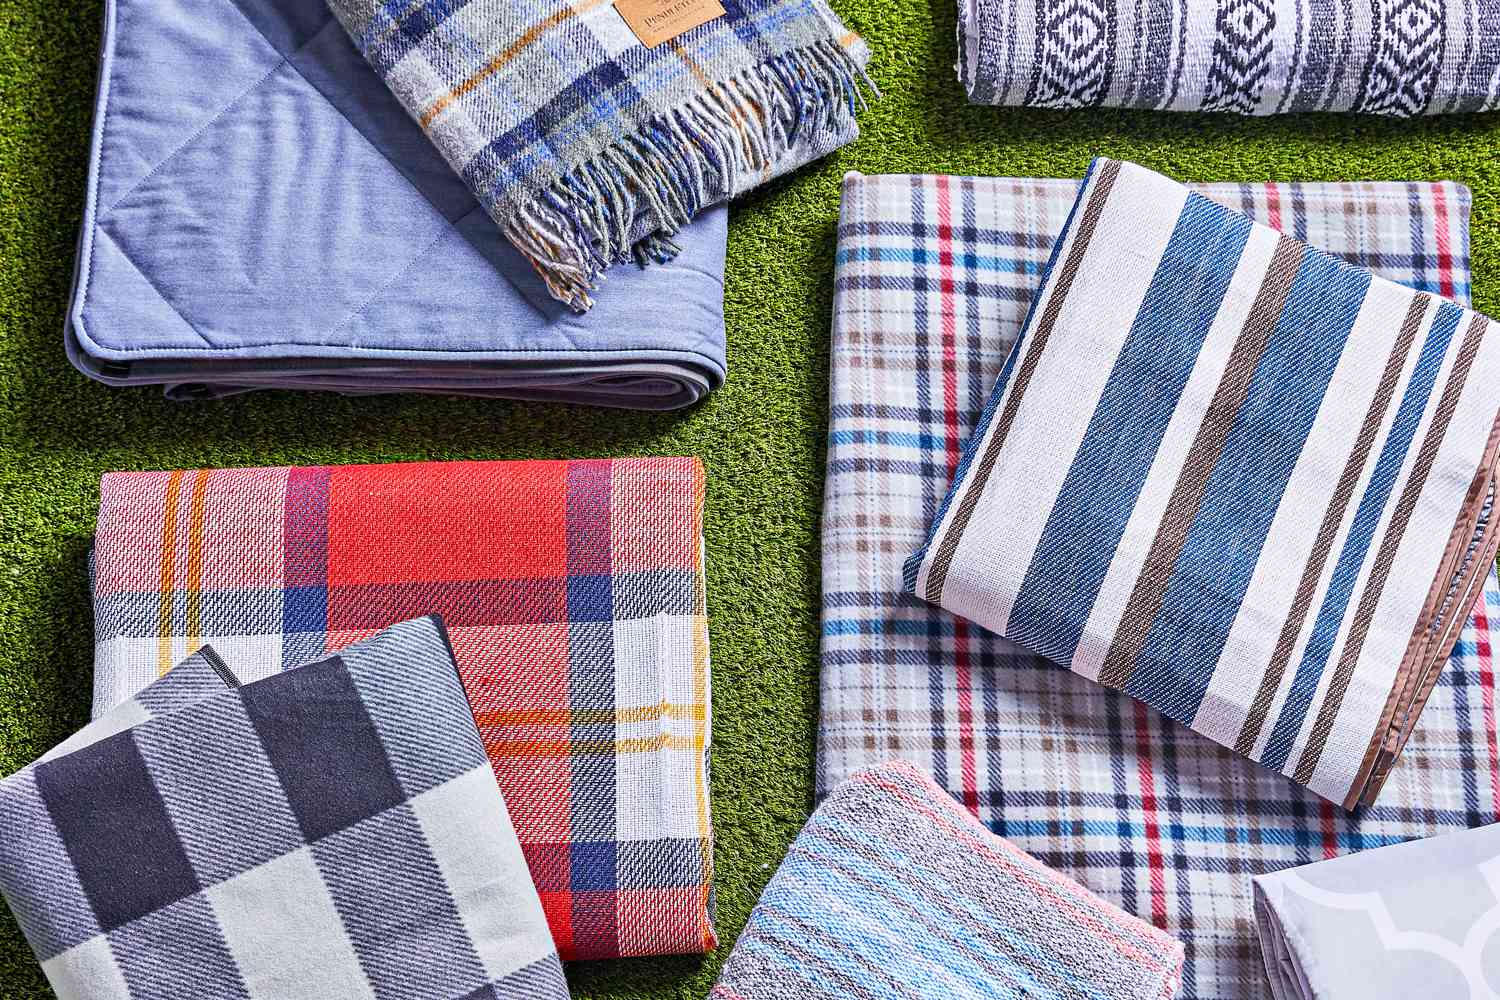 Picnic Blanket Review: The Perfect Outdoor Companion